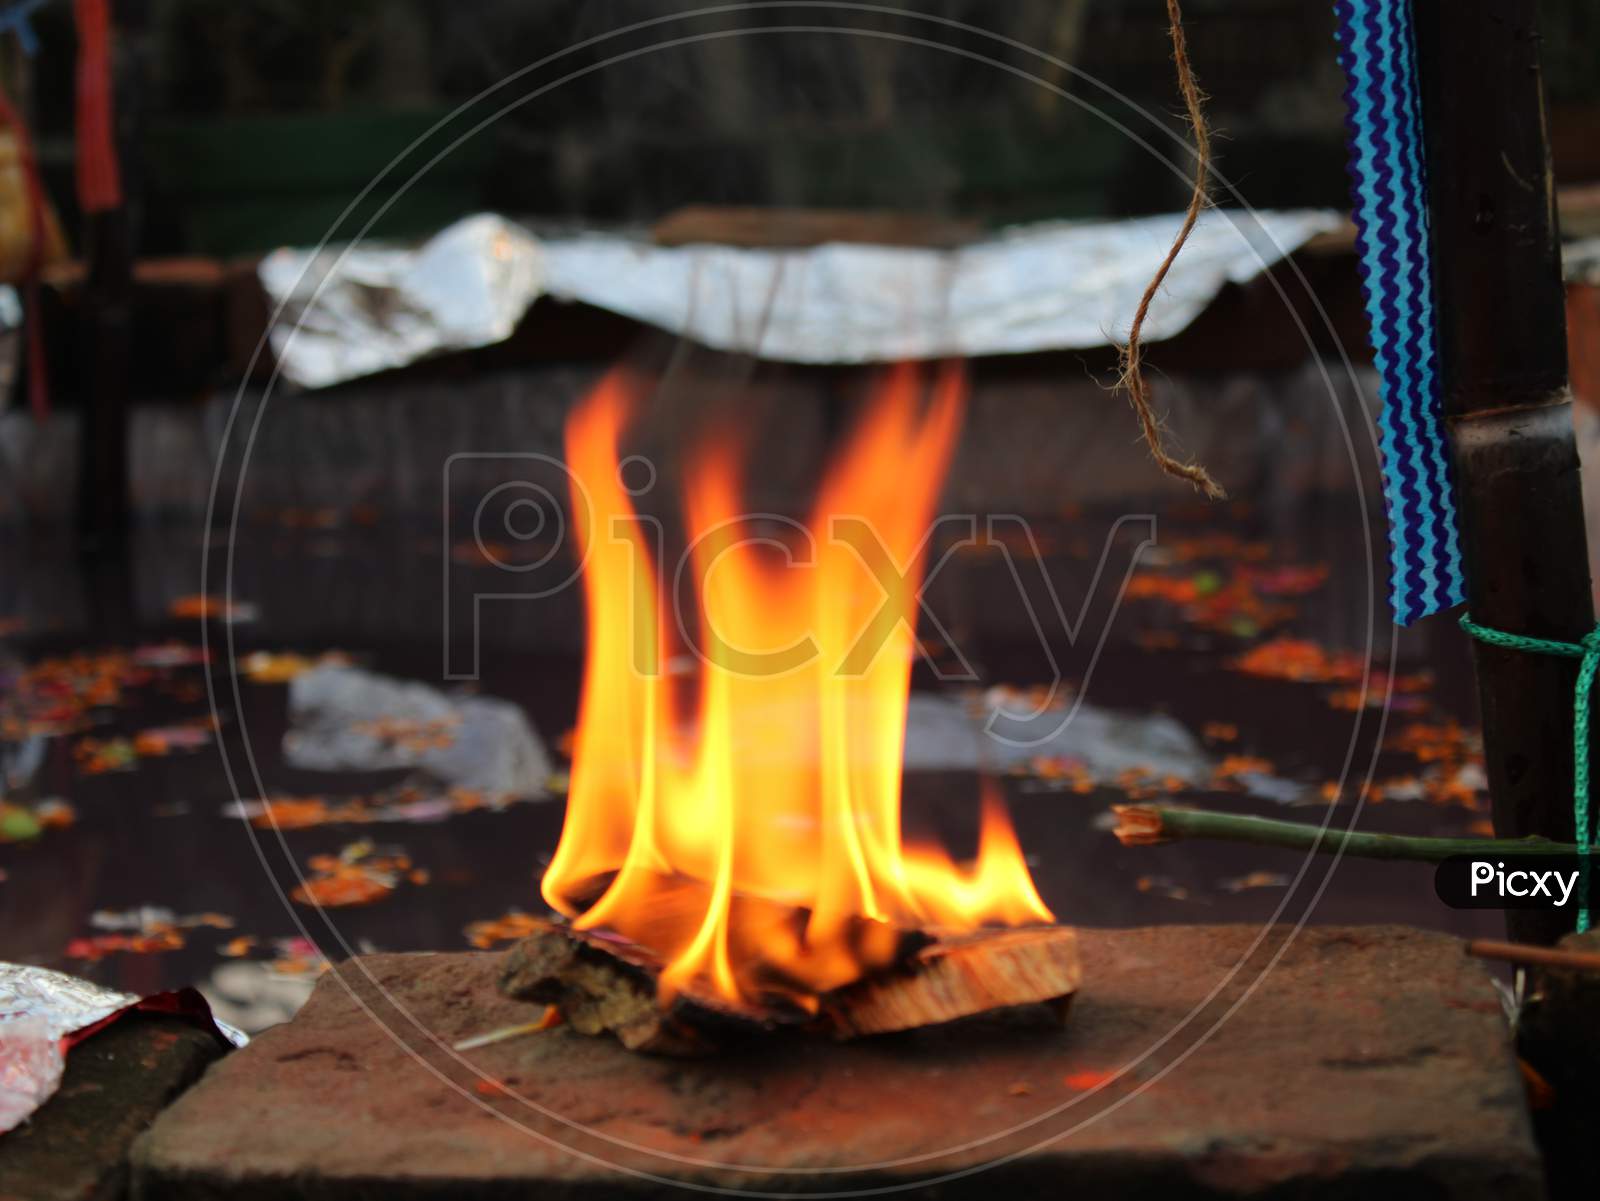 Fire click with manual focus